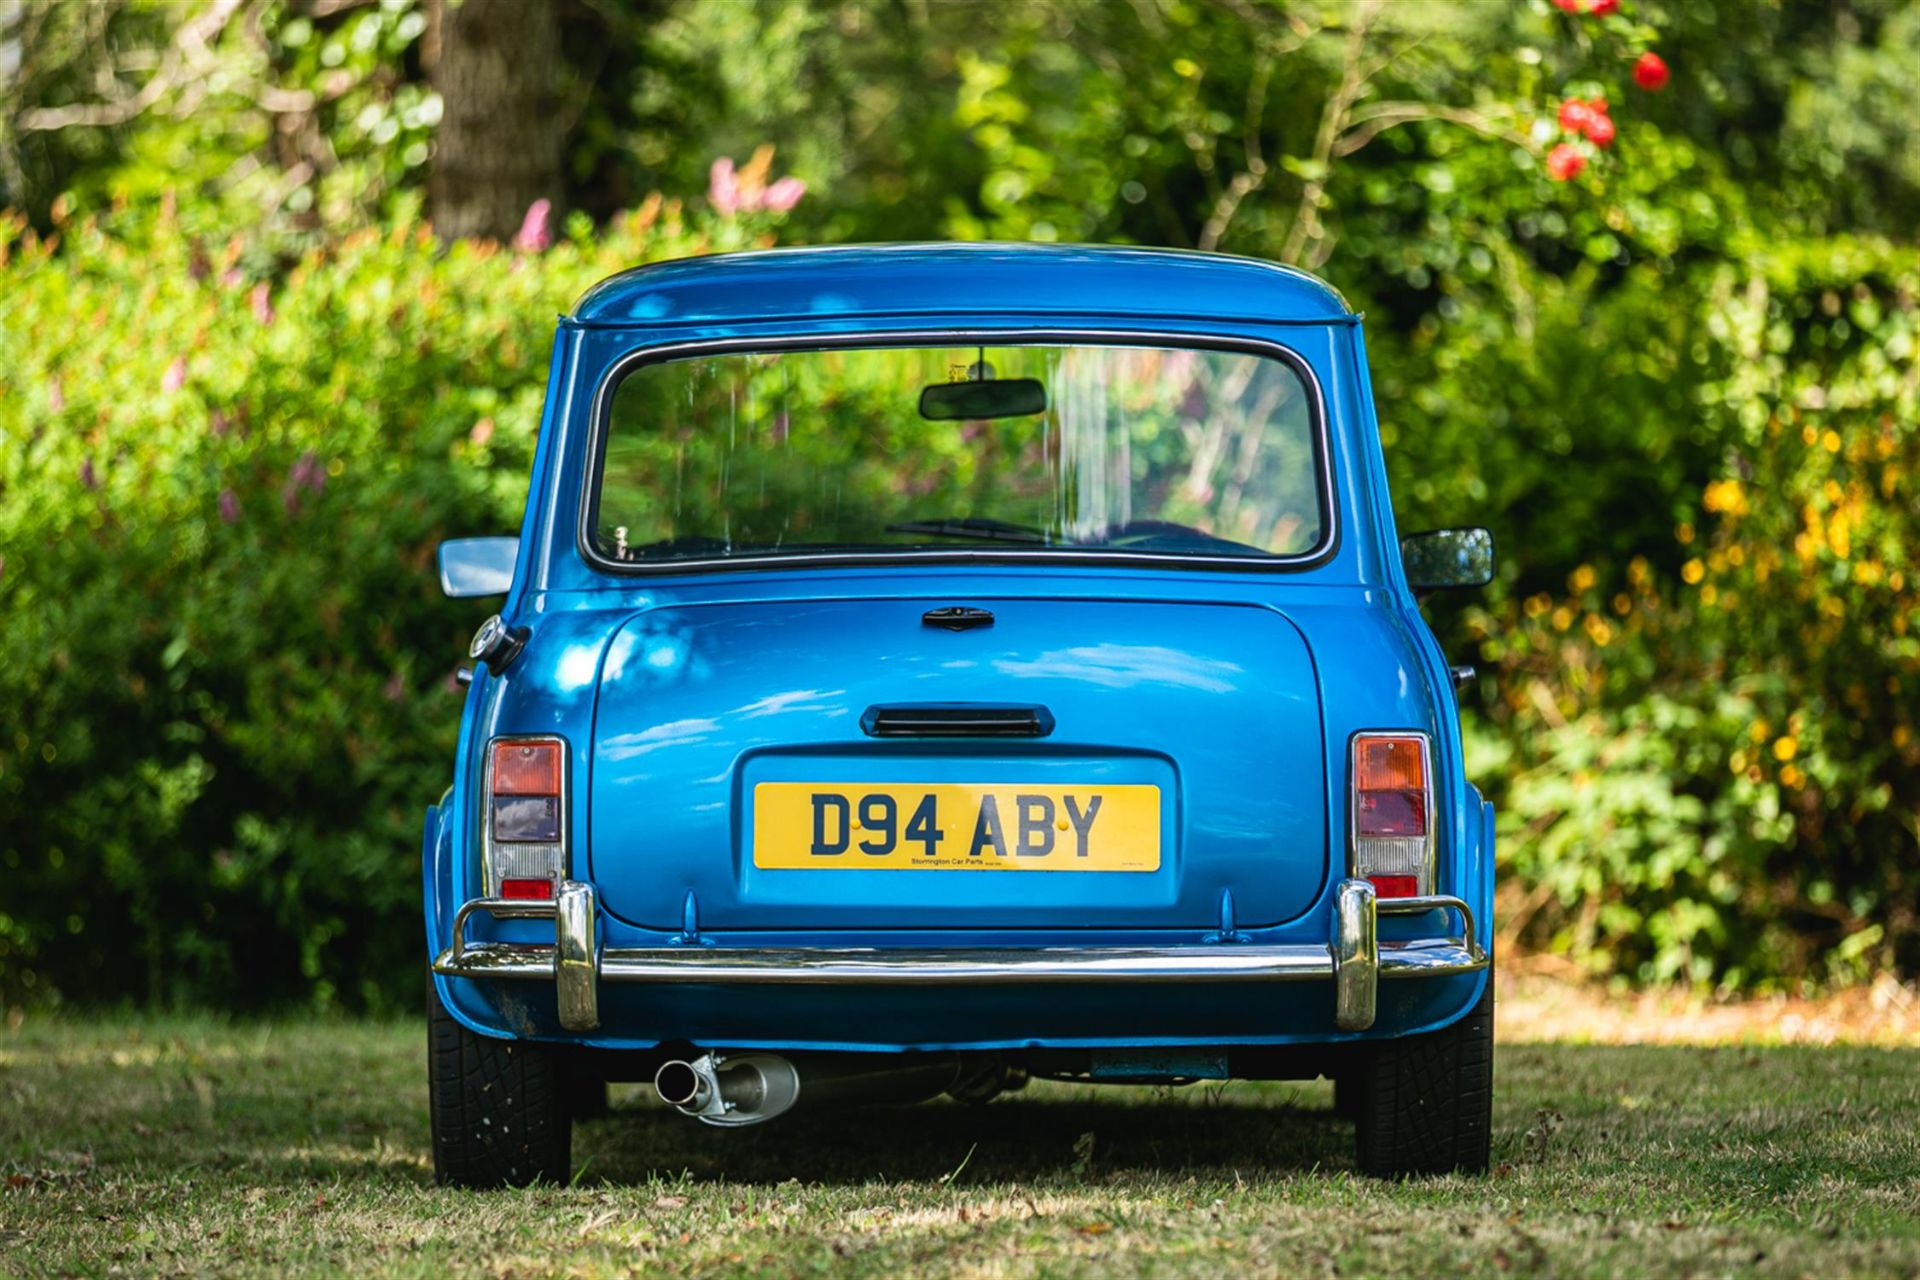 1986 Austin Mini Mayfair - 1275 Special - Image 7 of 10